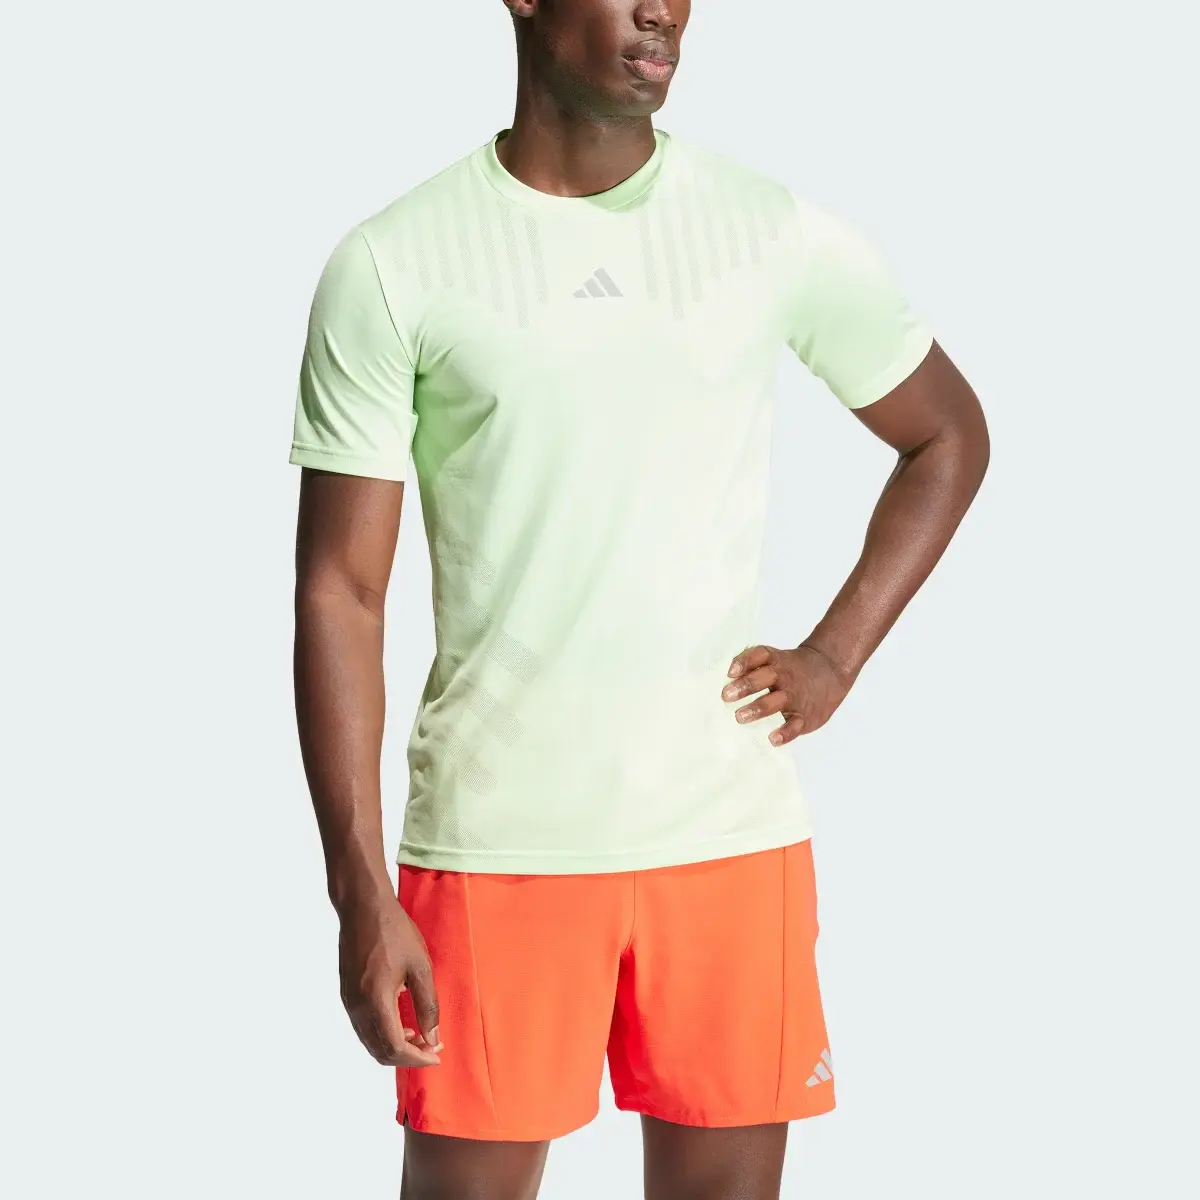 Adidas HIIT Airchill Workout Tee. 1